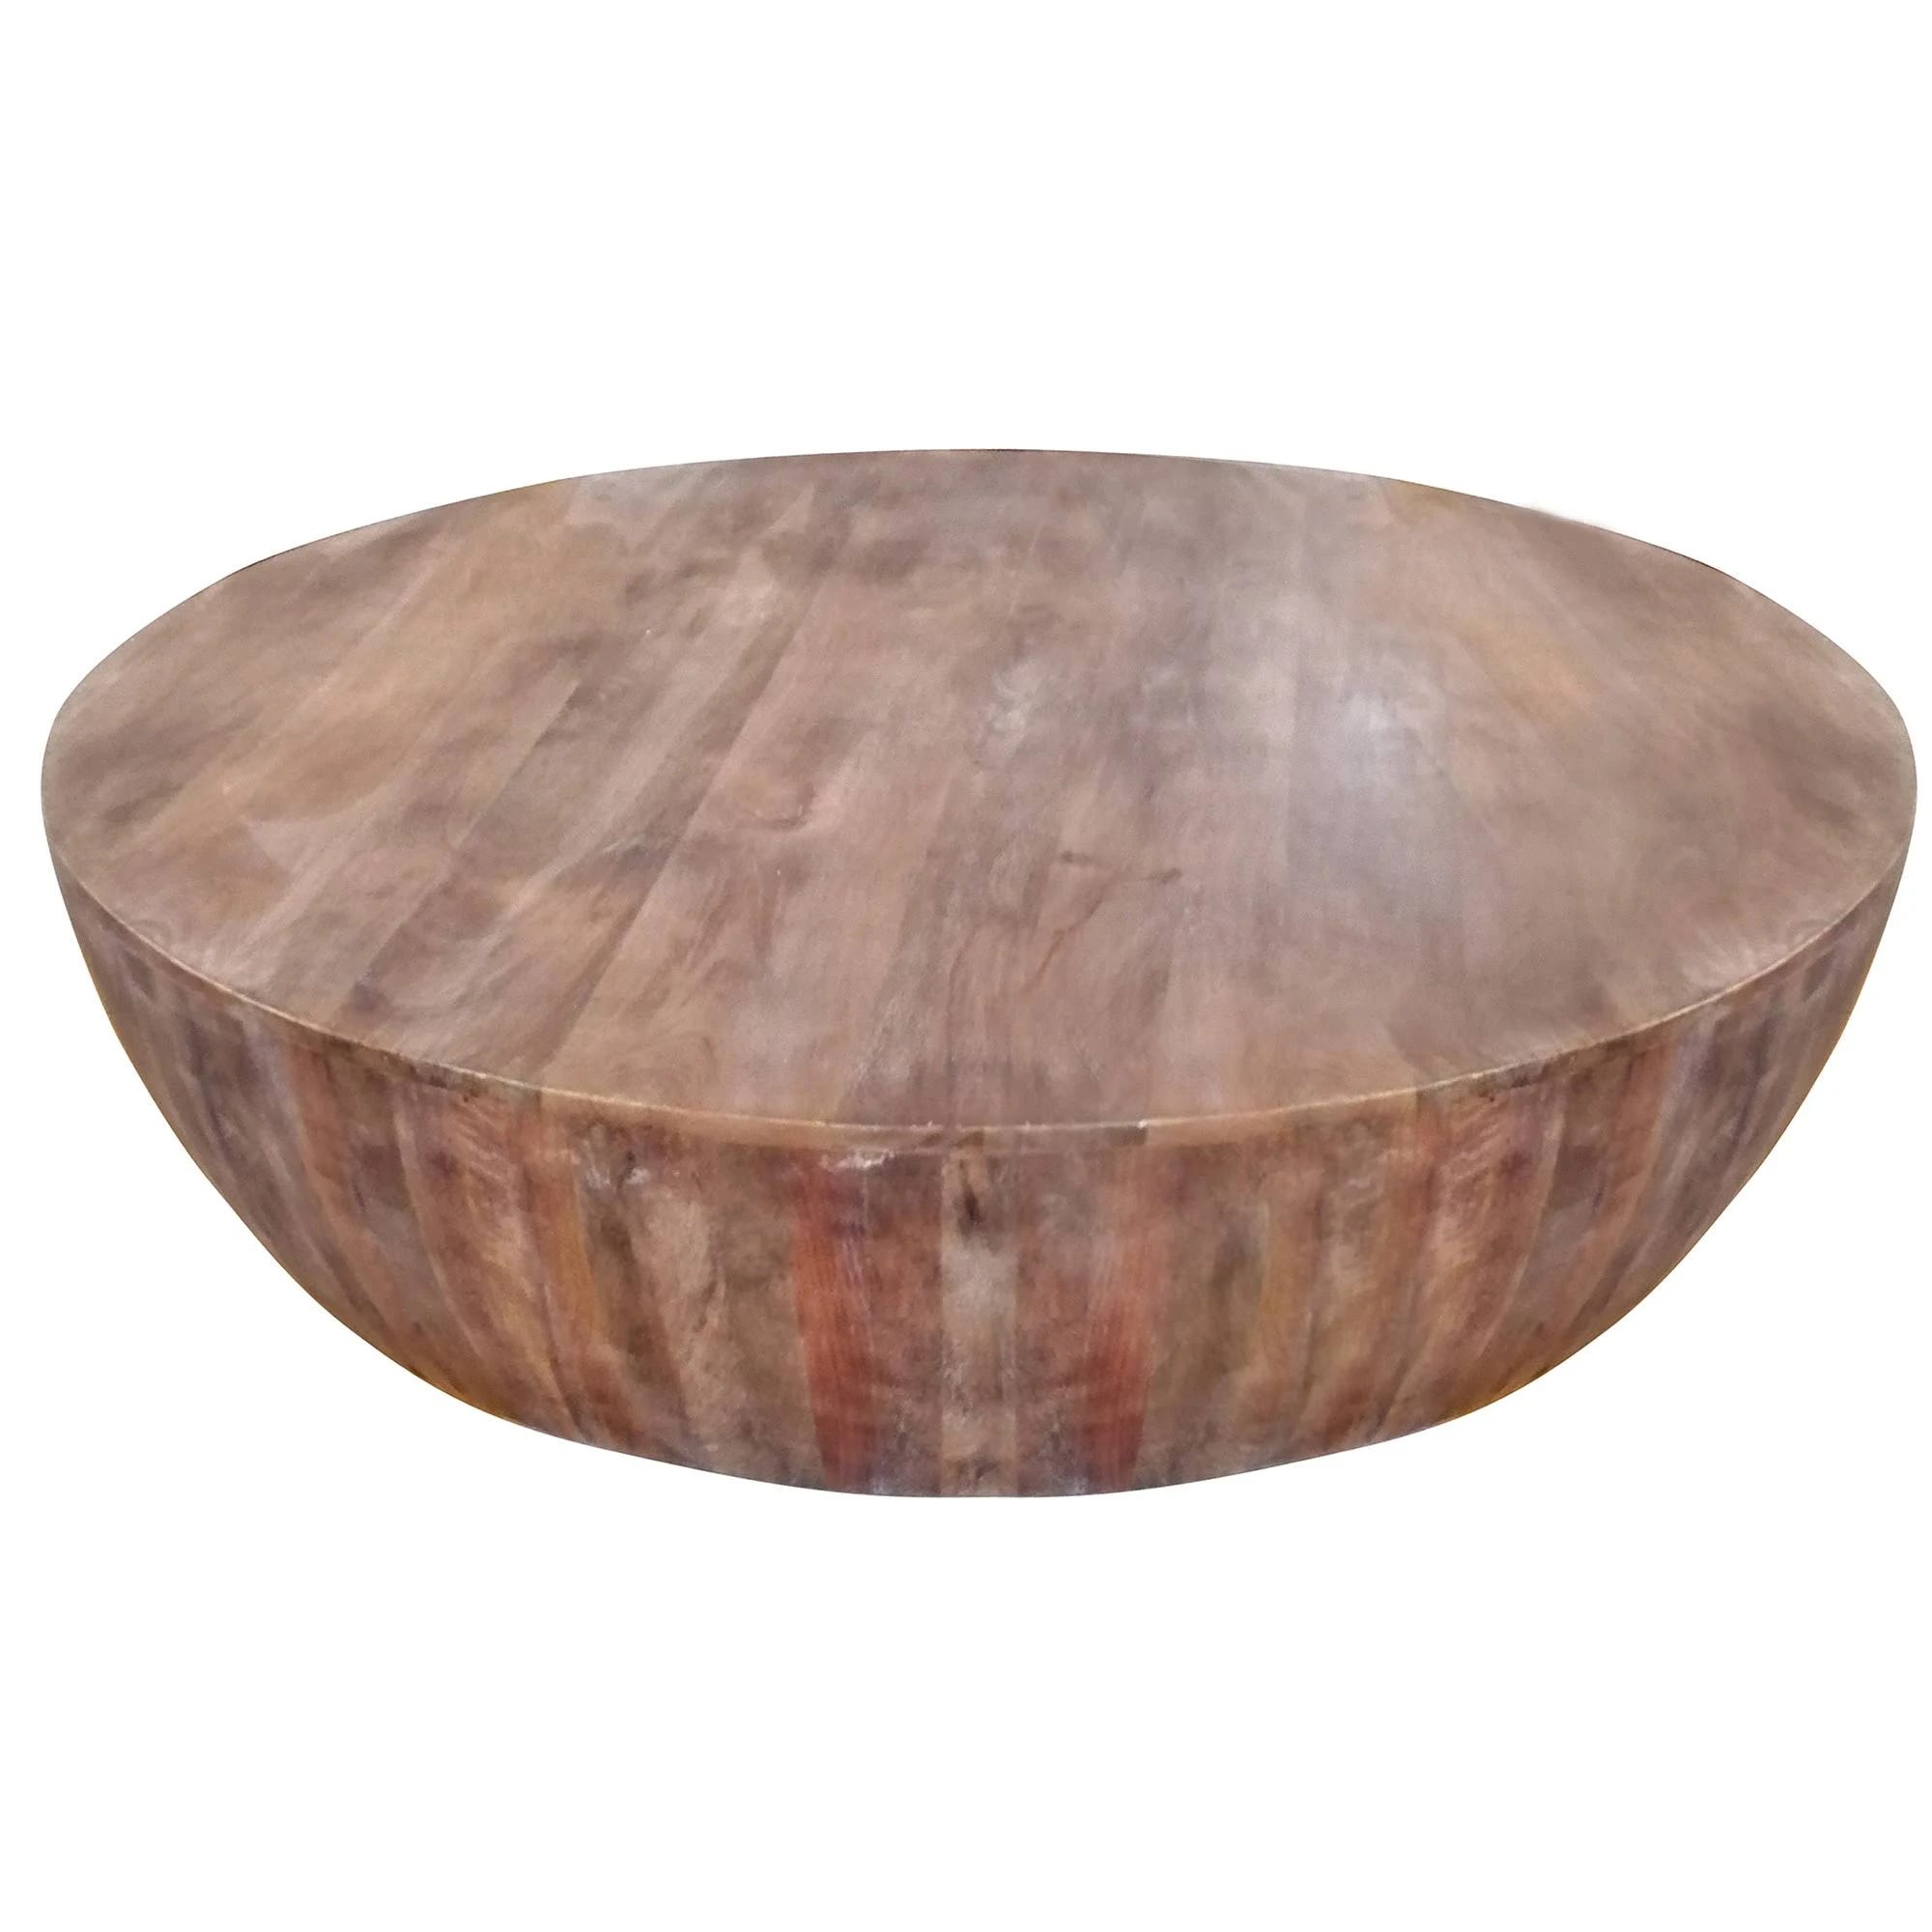 Handcrafted Drum Shape Mango Wood Coffee Table | Image